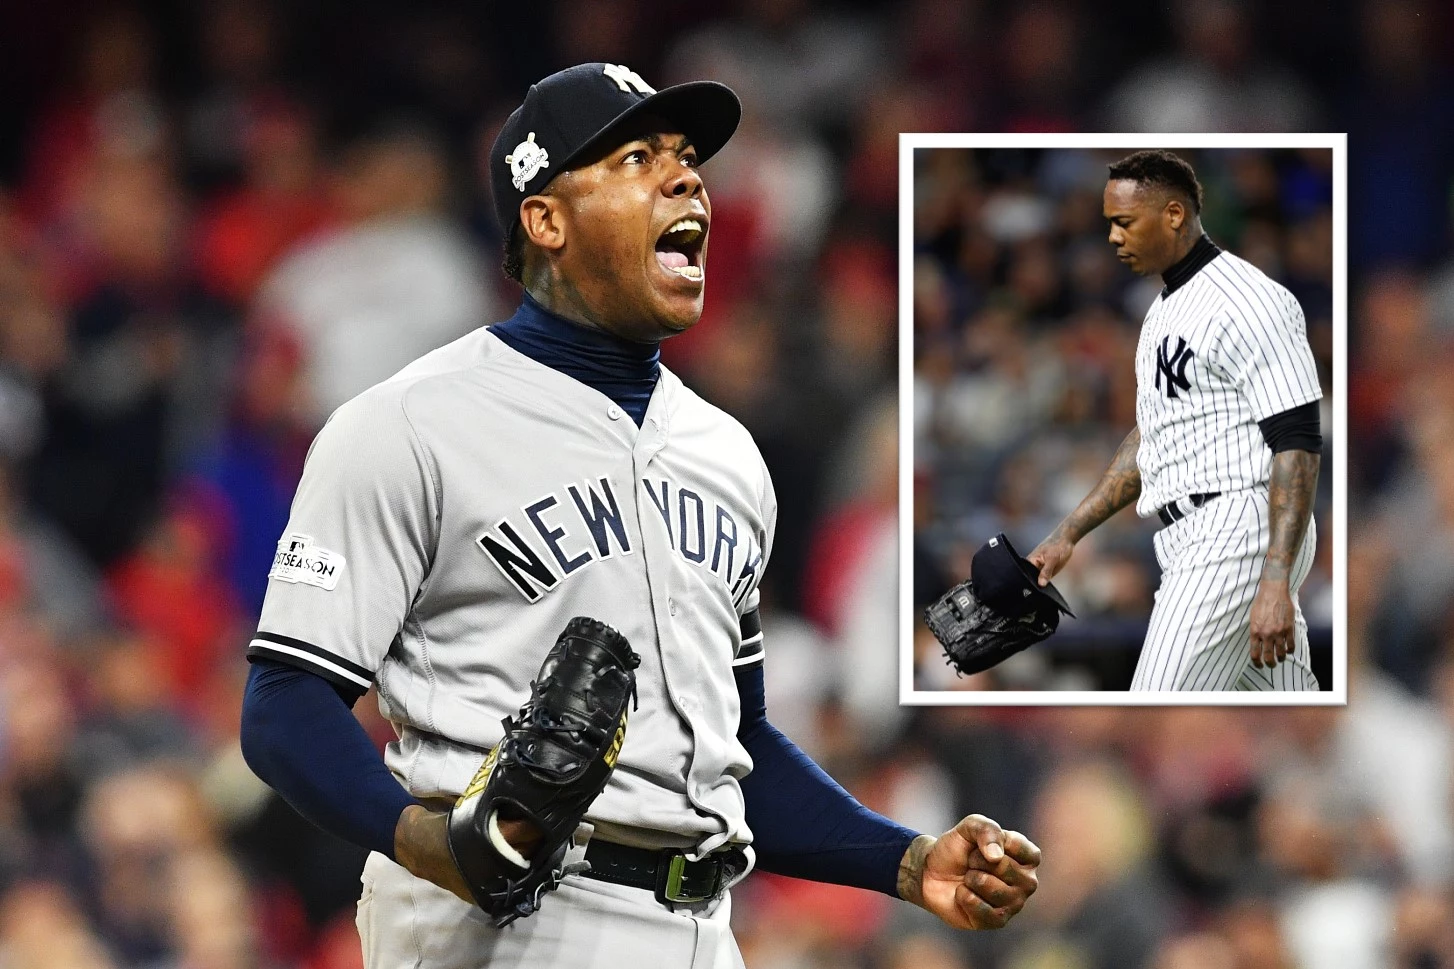 Yankees need to replace Aroldis Chapman as closer, at least for now